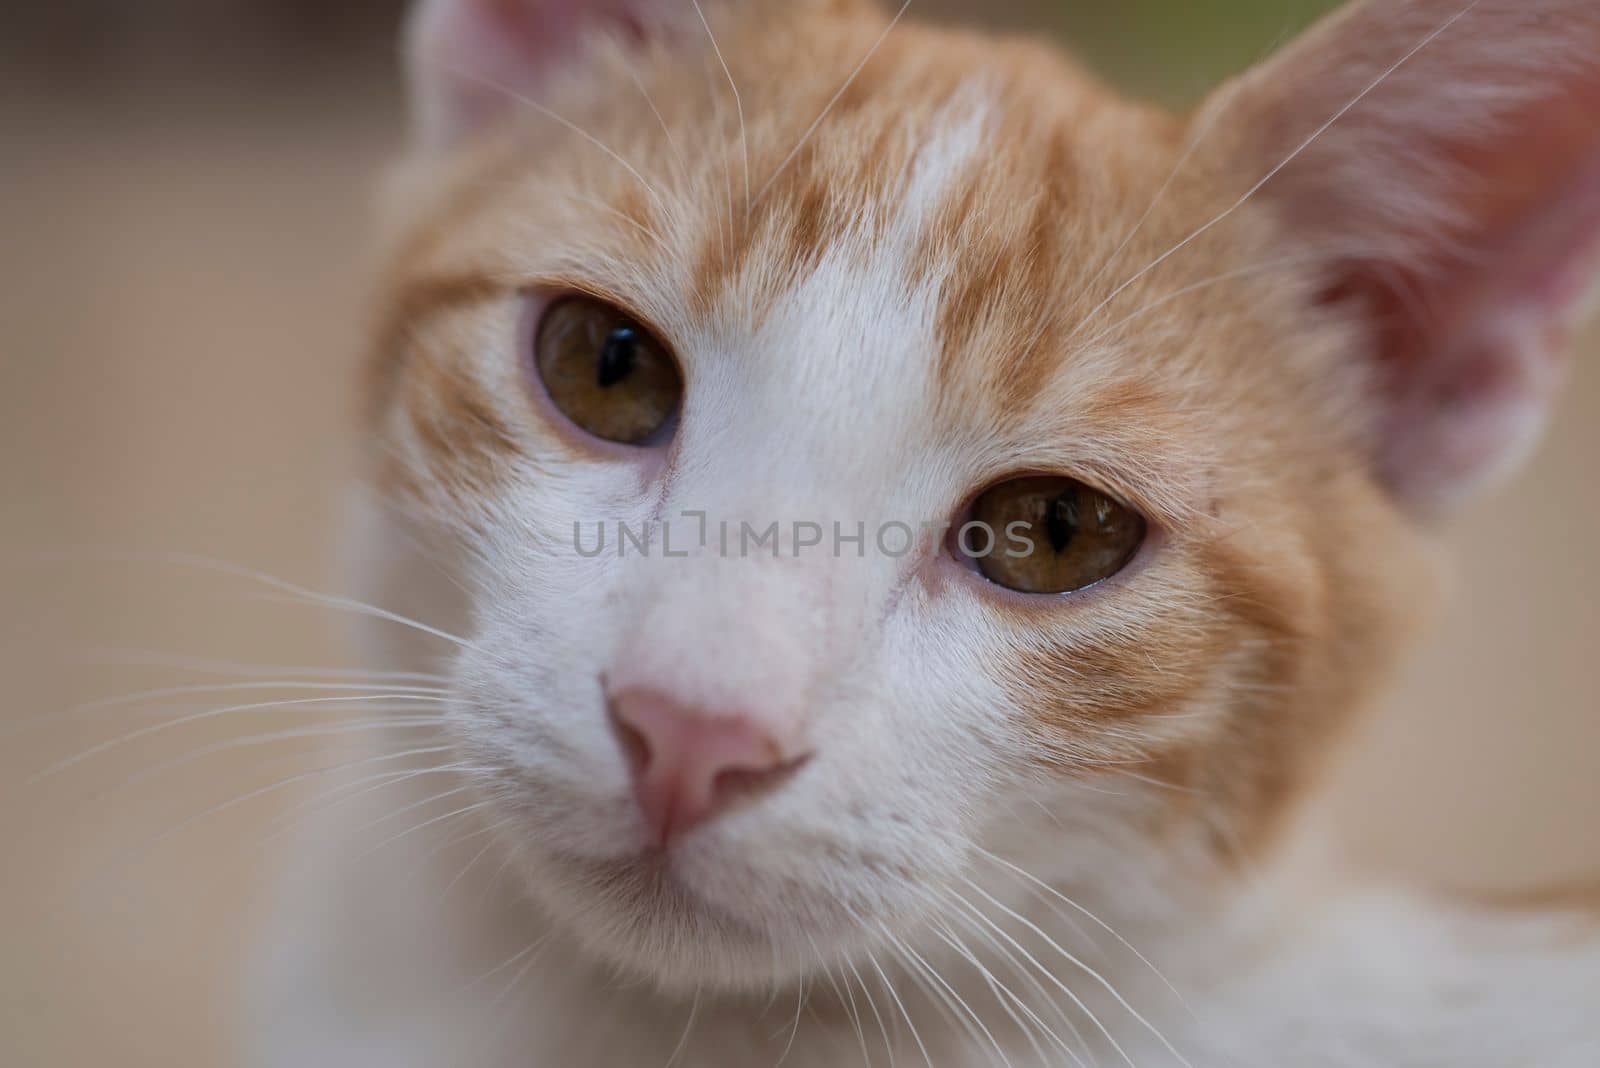 Closeup detail of cute domestic tabby house cat felis catus face with whiskers